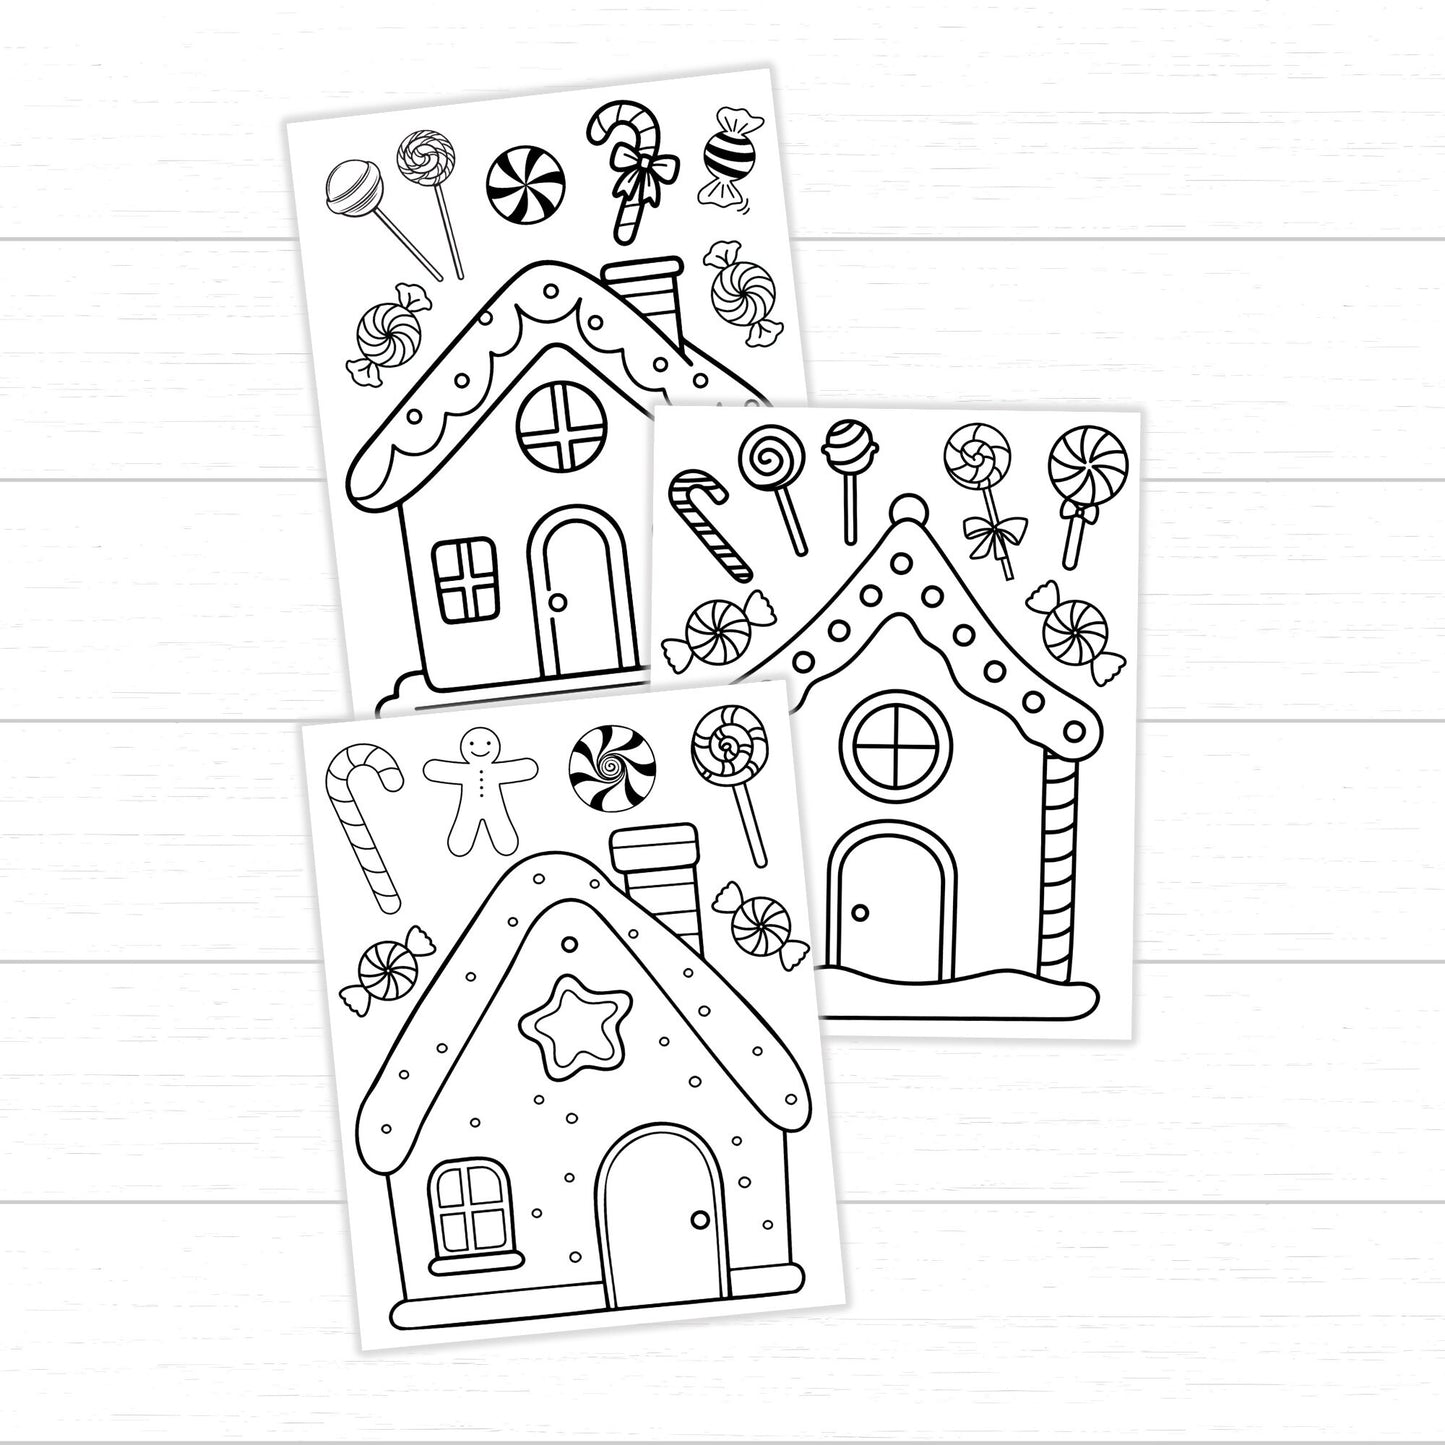 Gingerbread House Coloring Pages, Christmas Coloring Pages for Kids, Printable Christmas Coloring Pages, Christmas Activities for Kids